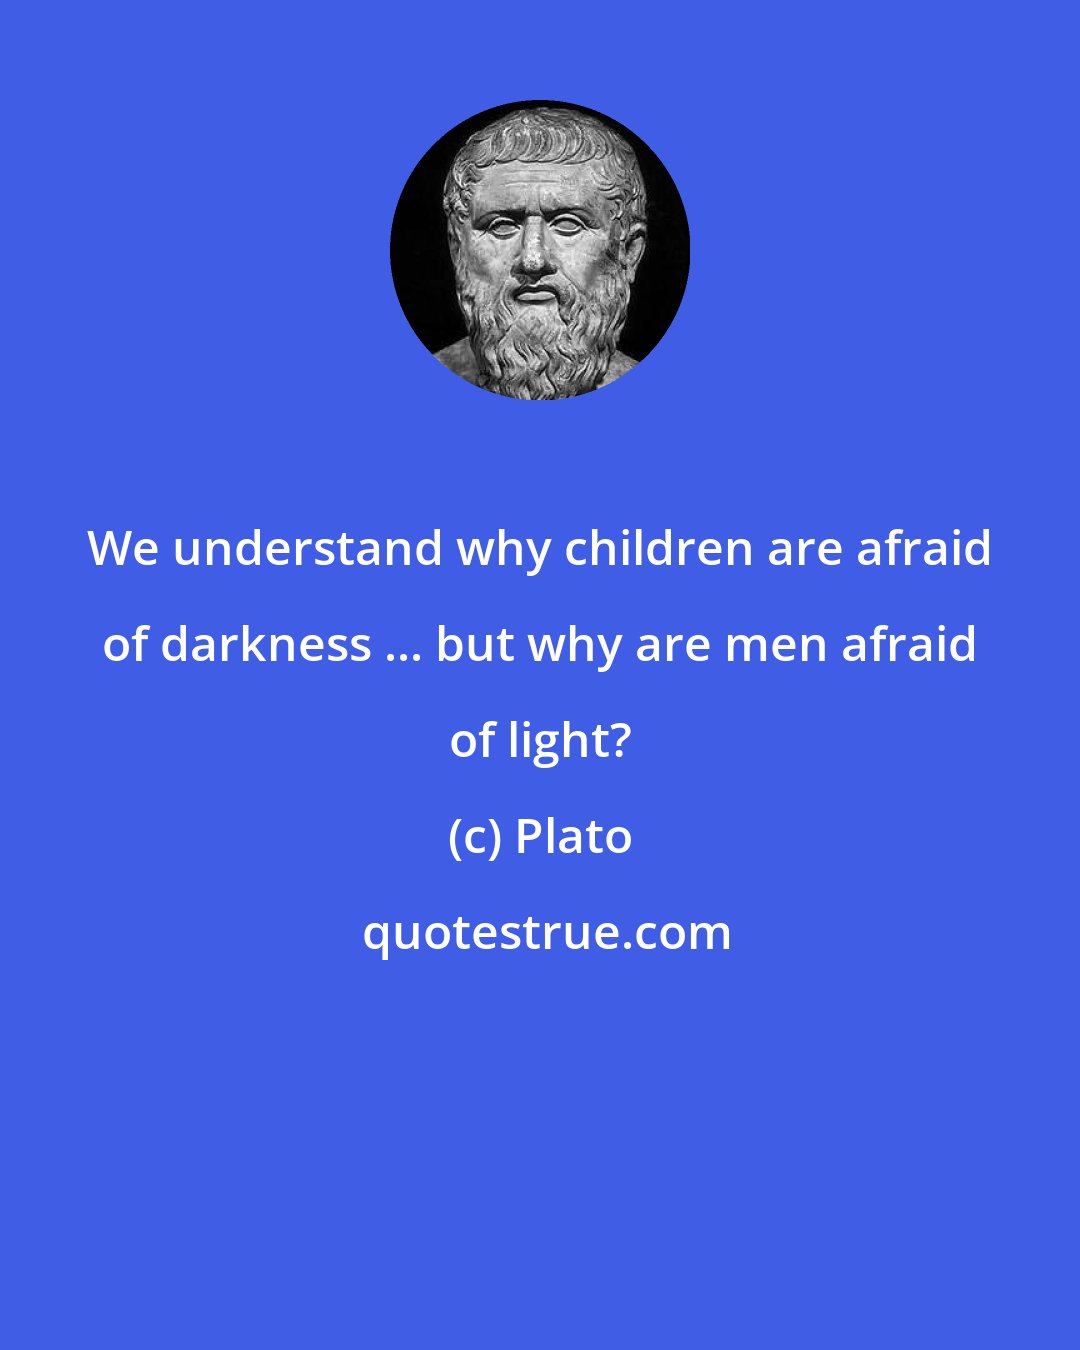 Plato: We understand why children are afraid of darkness ... but why are men afraid of light?